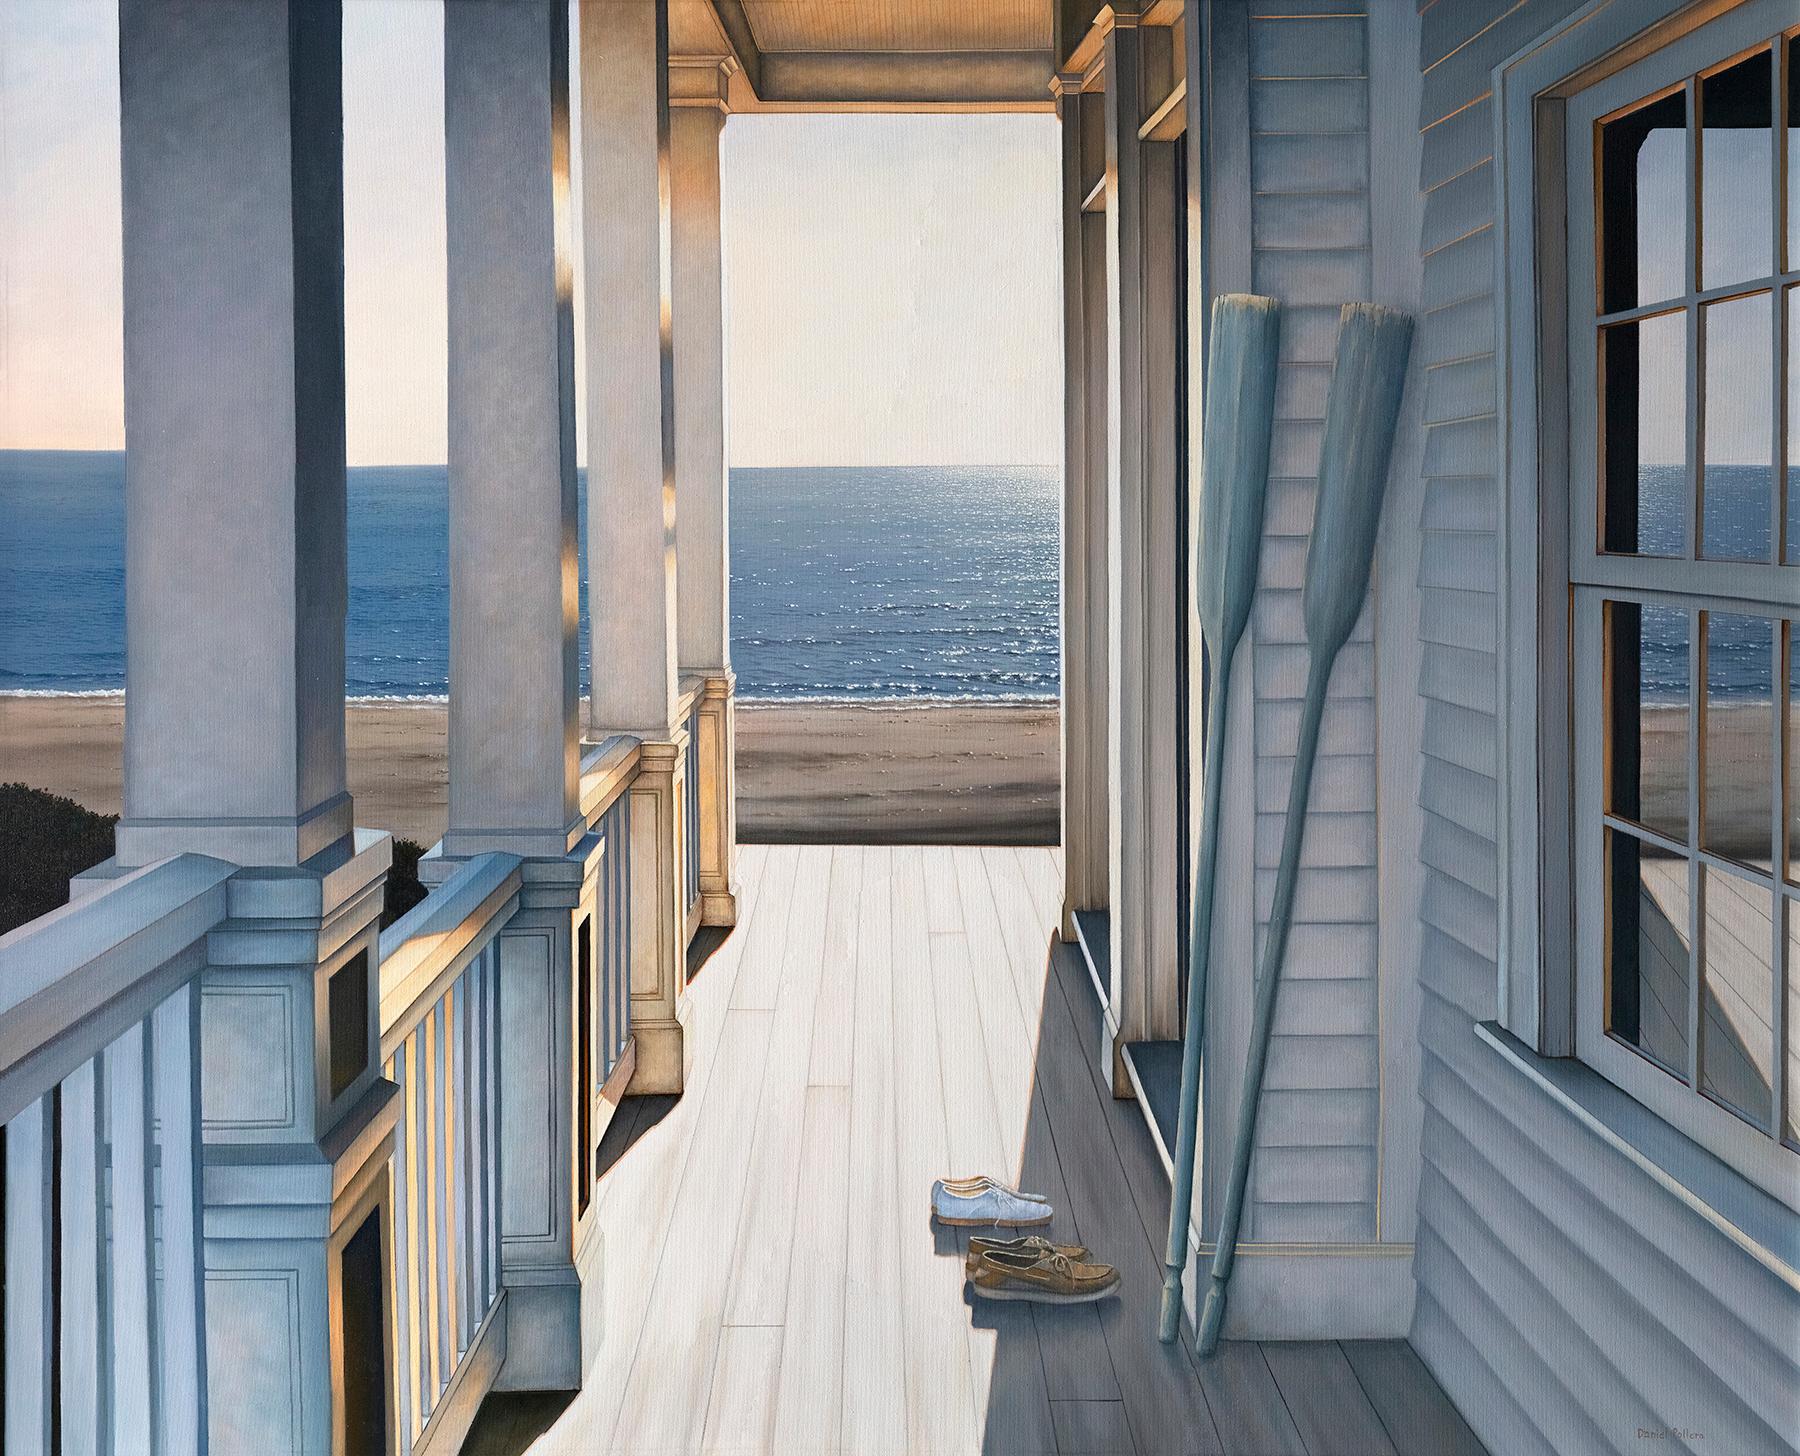 This coastal seascape limited edition print captures a scene from the porch of a beachfront property along the coast. A setting sun casts sharp light and cool blue-grey shadows across the porch, where two sets of shoes and two boat paddles rest